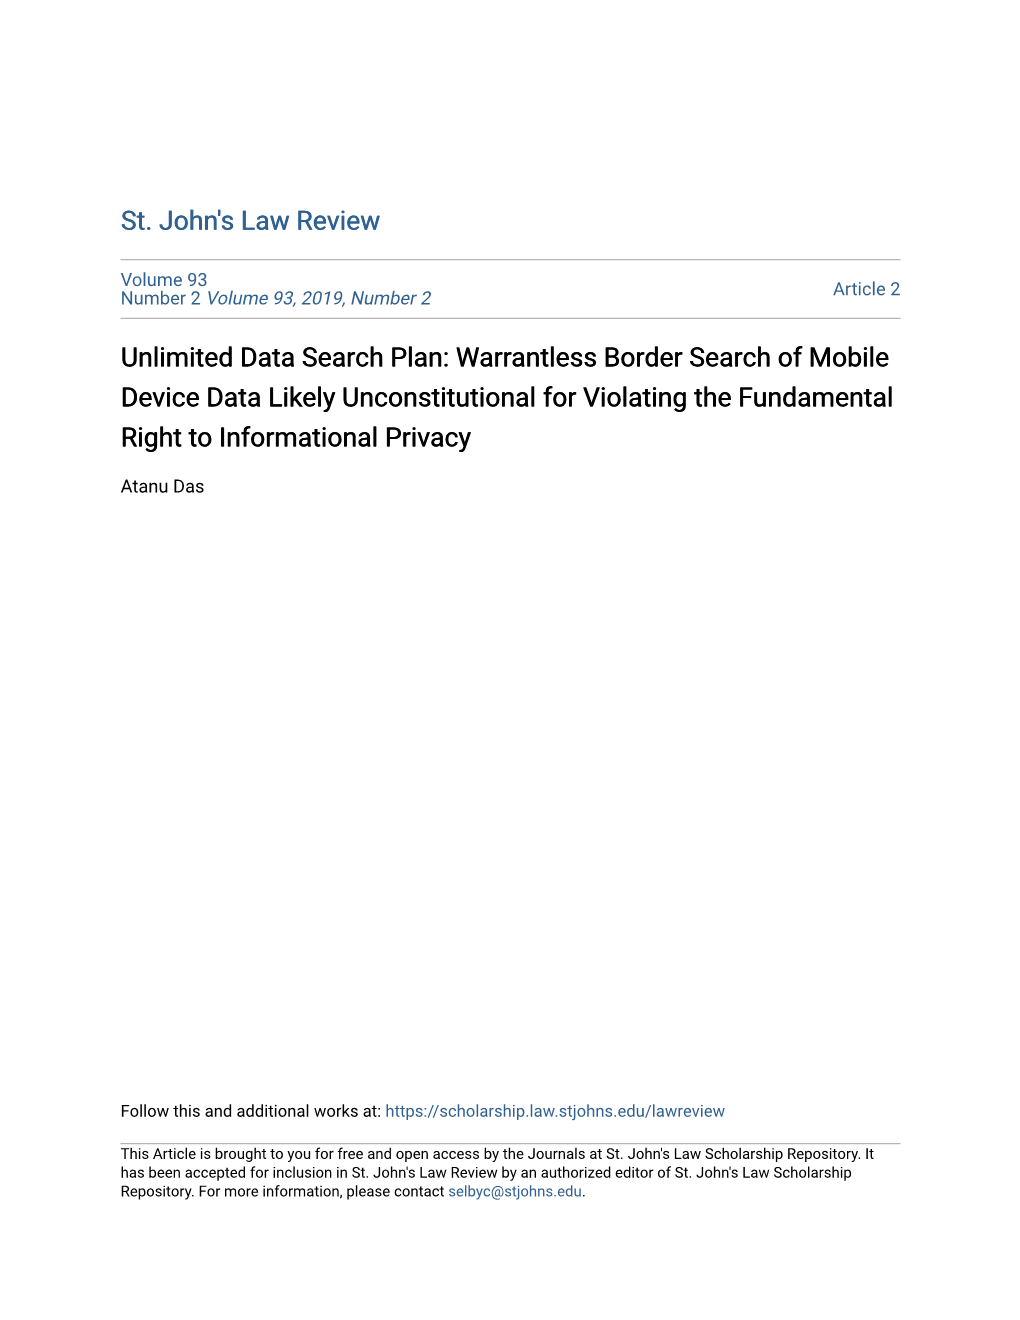 Unlimited Data Search Plan: Warrantless Border Search of Mobile Device Data Likely Unconstitutional for Violating the Fundamental Right to Informational Privacy